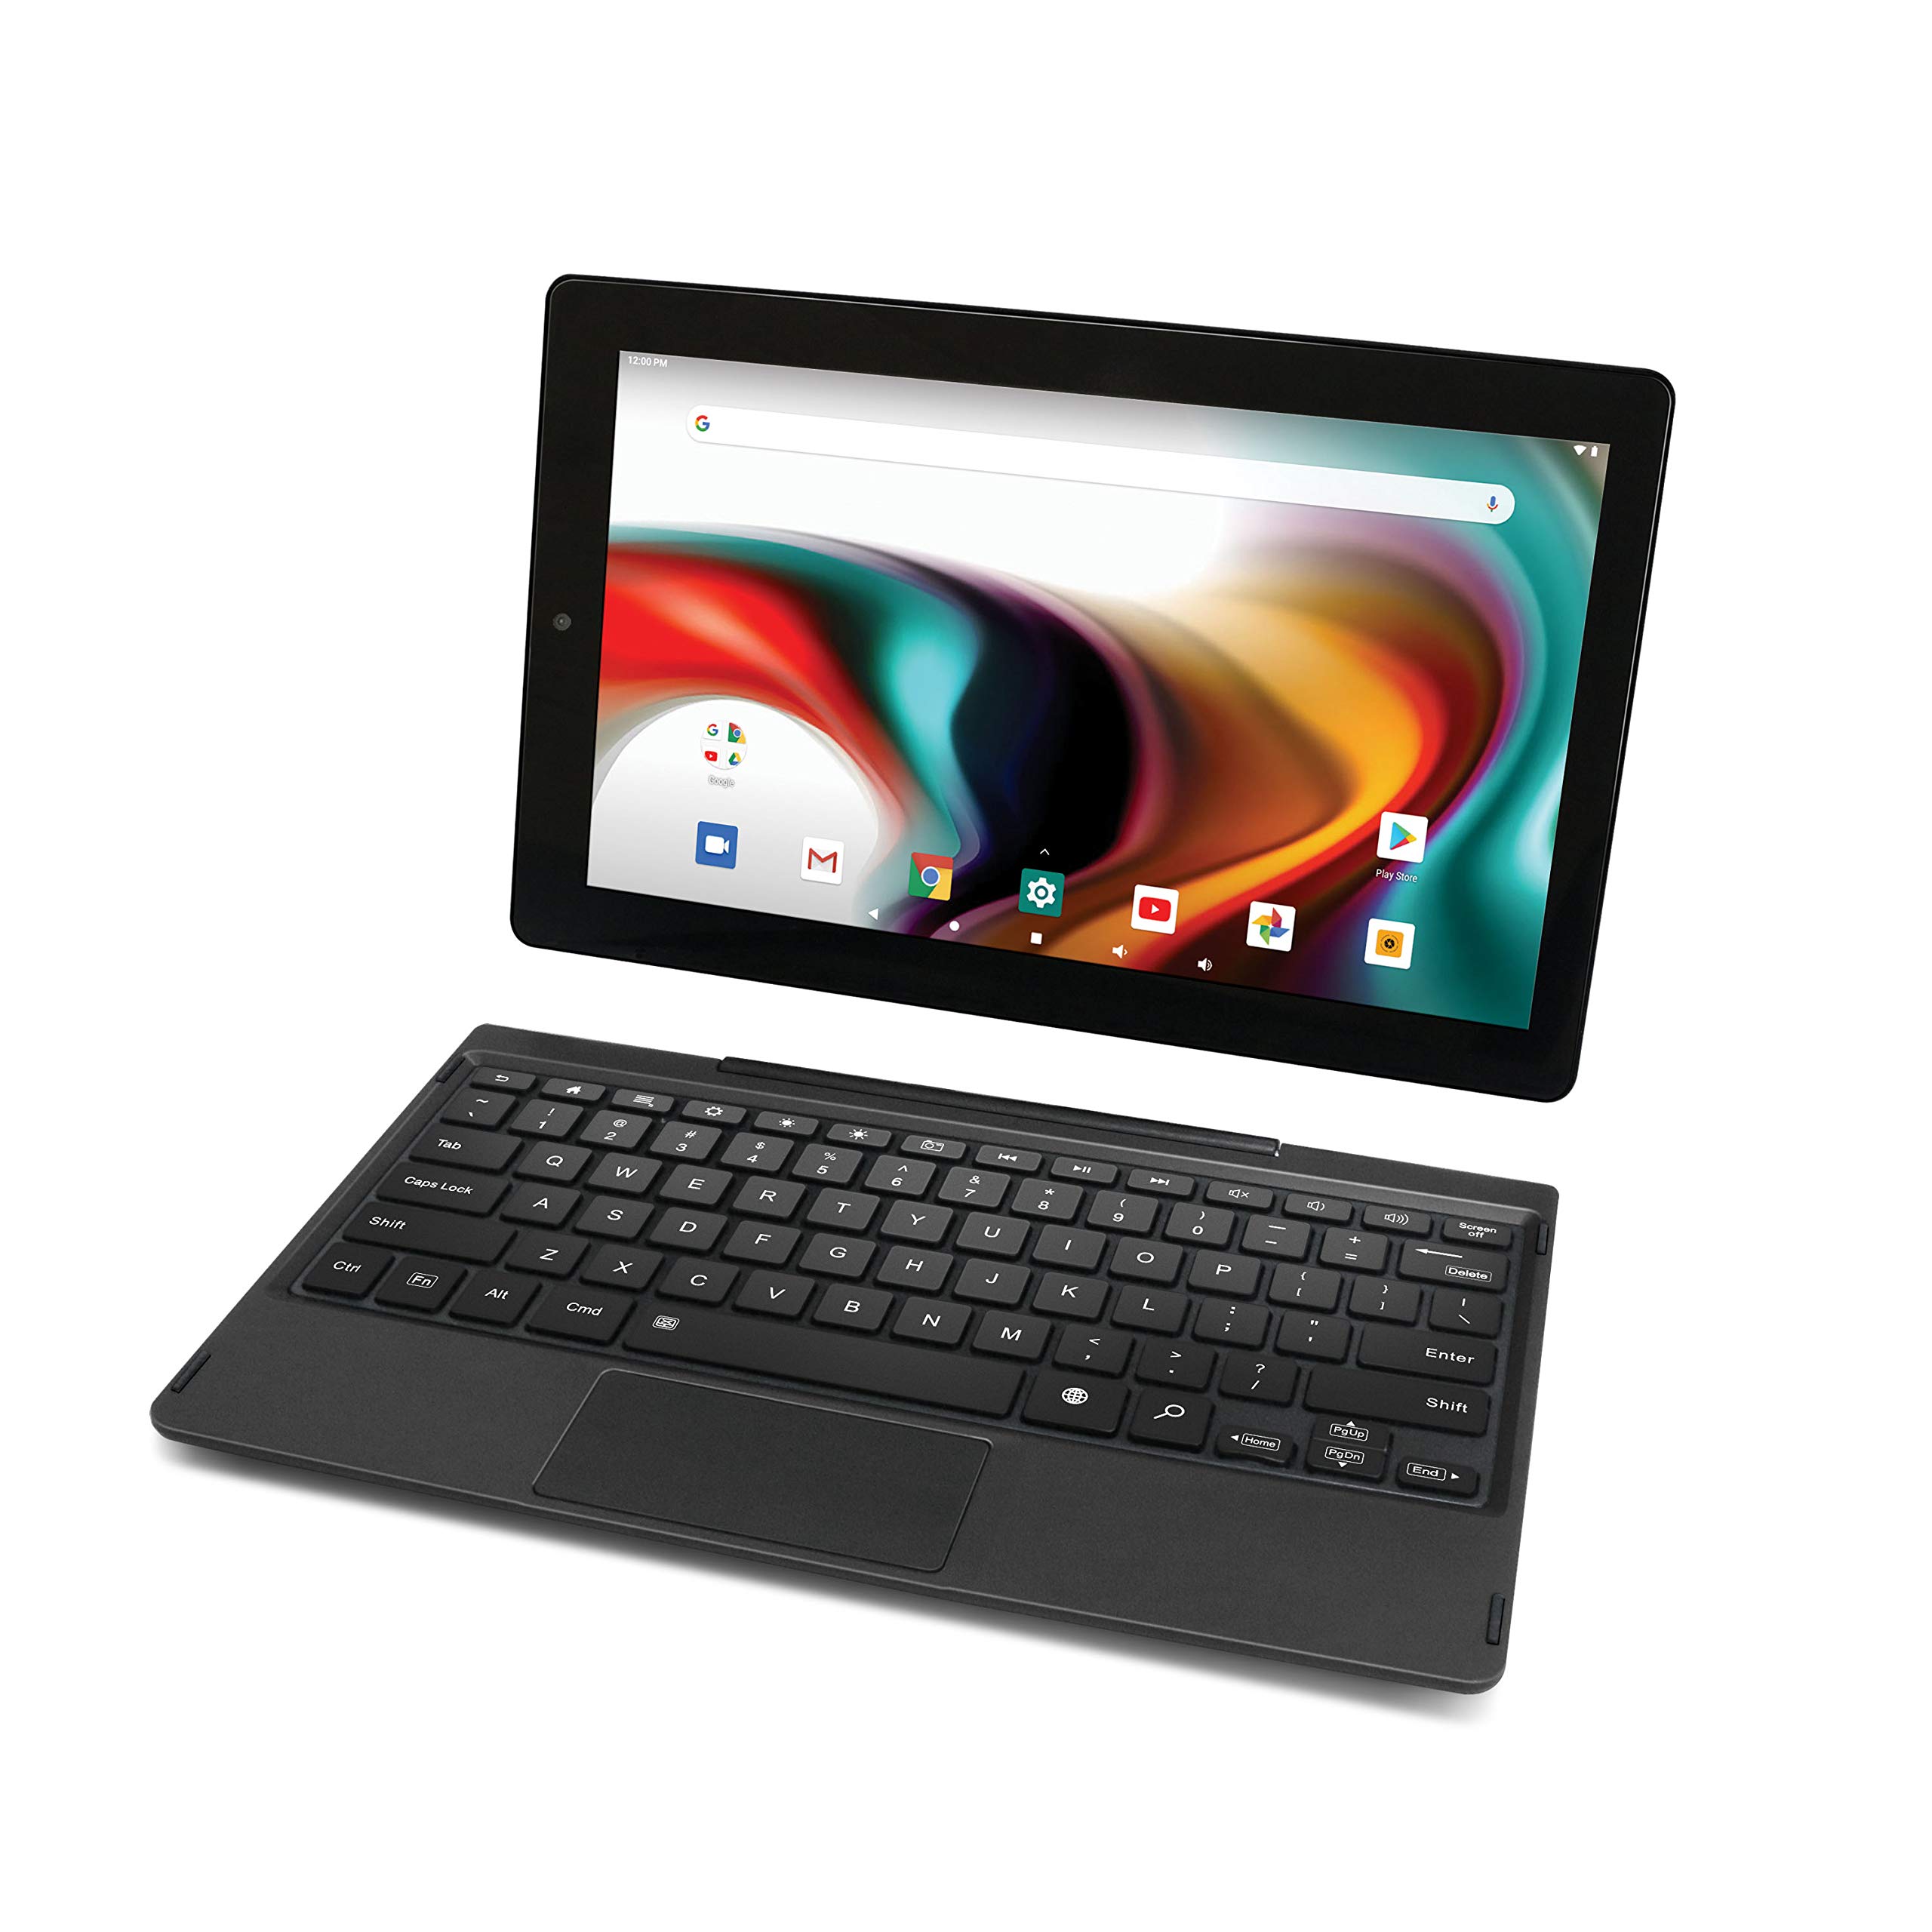 RCA 11 Delta Pro 11.6 Inch Quad-Core 2GB RAM 32GB Storage IPS 1366 x 768 Touchscreen WiFi Bluetooth with Detachable Keyboard Android 9.0 Tablet (11.6", Charcoal)